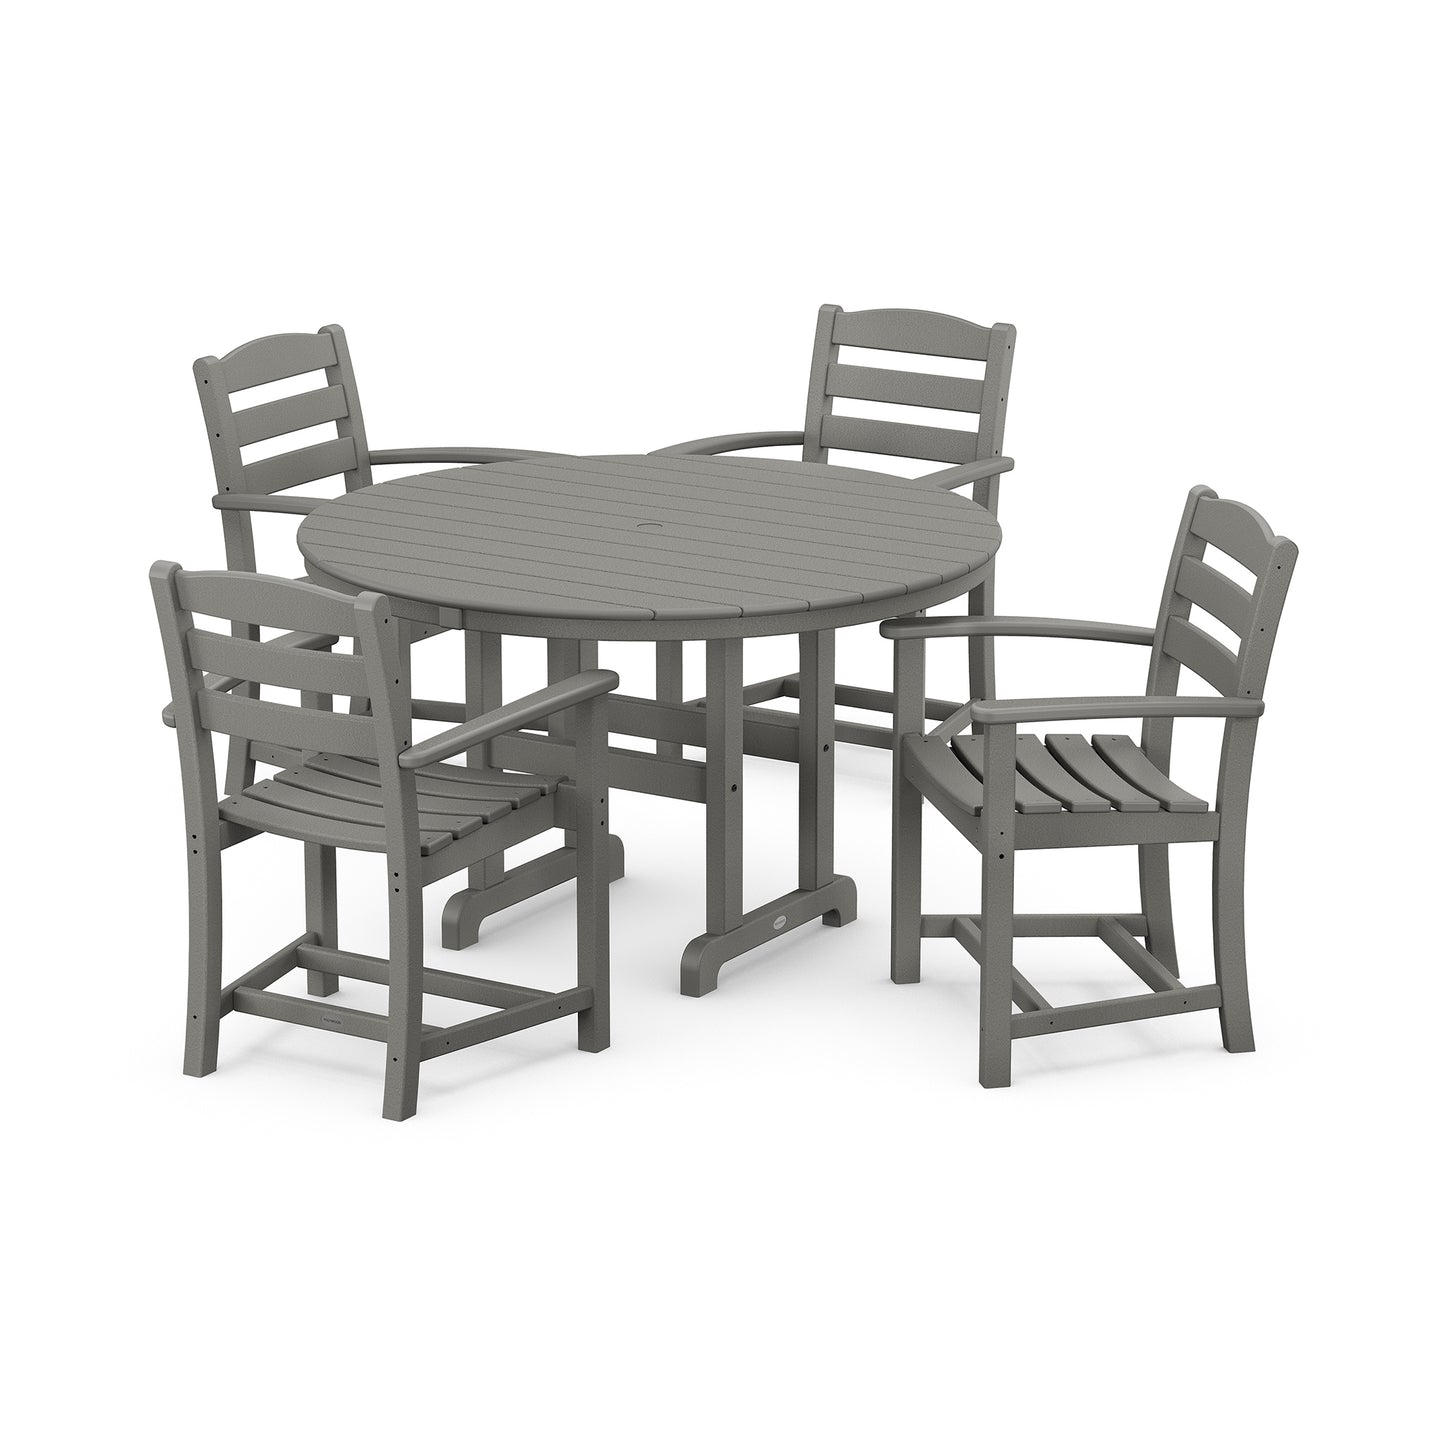 A 3D rendering of a POLYWOOD La Casa Cafe 5-Piece Dining Set with four grey chairs and a matching round table on a white background.